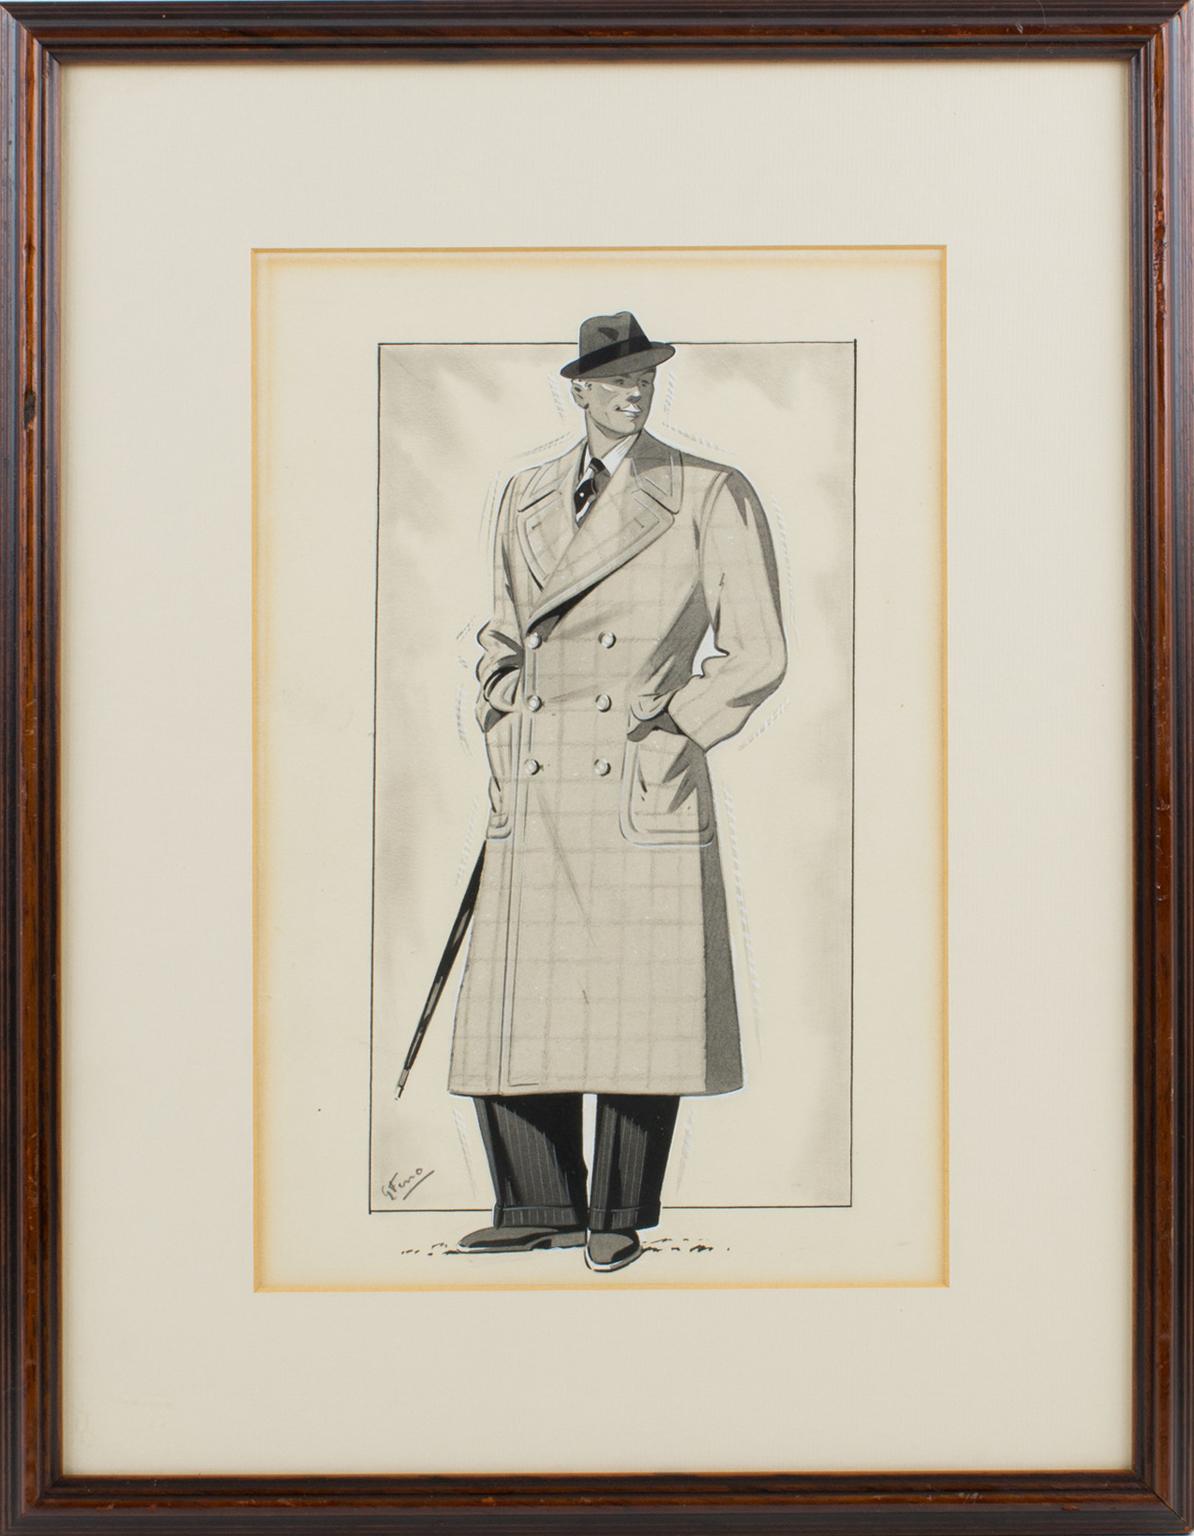 Original Art Deco fashion drawing, ink, and wash on Vellum paper by French artist G. Ferro. The artwork features a stylish male model with a typical Art Deco overcoat. The piece is signed G. Ferro in the bottom left corner. 
This image was probably